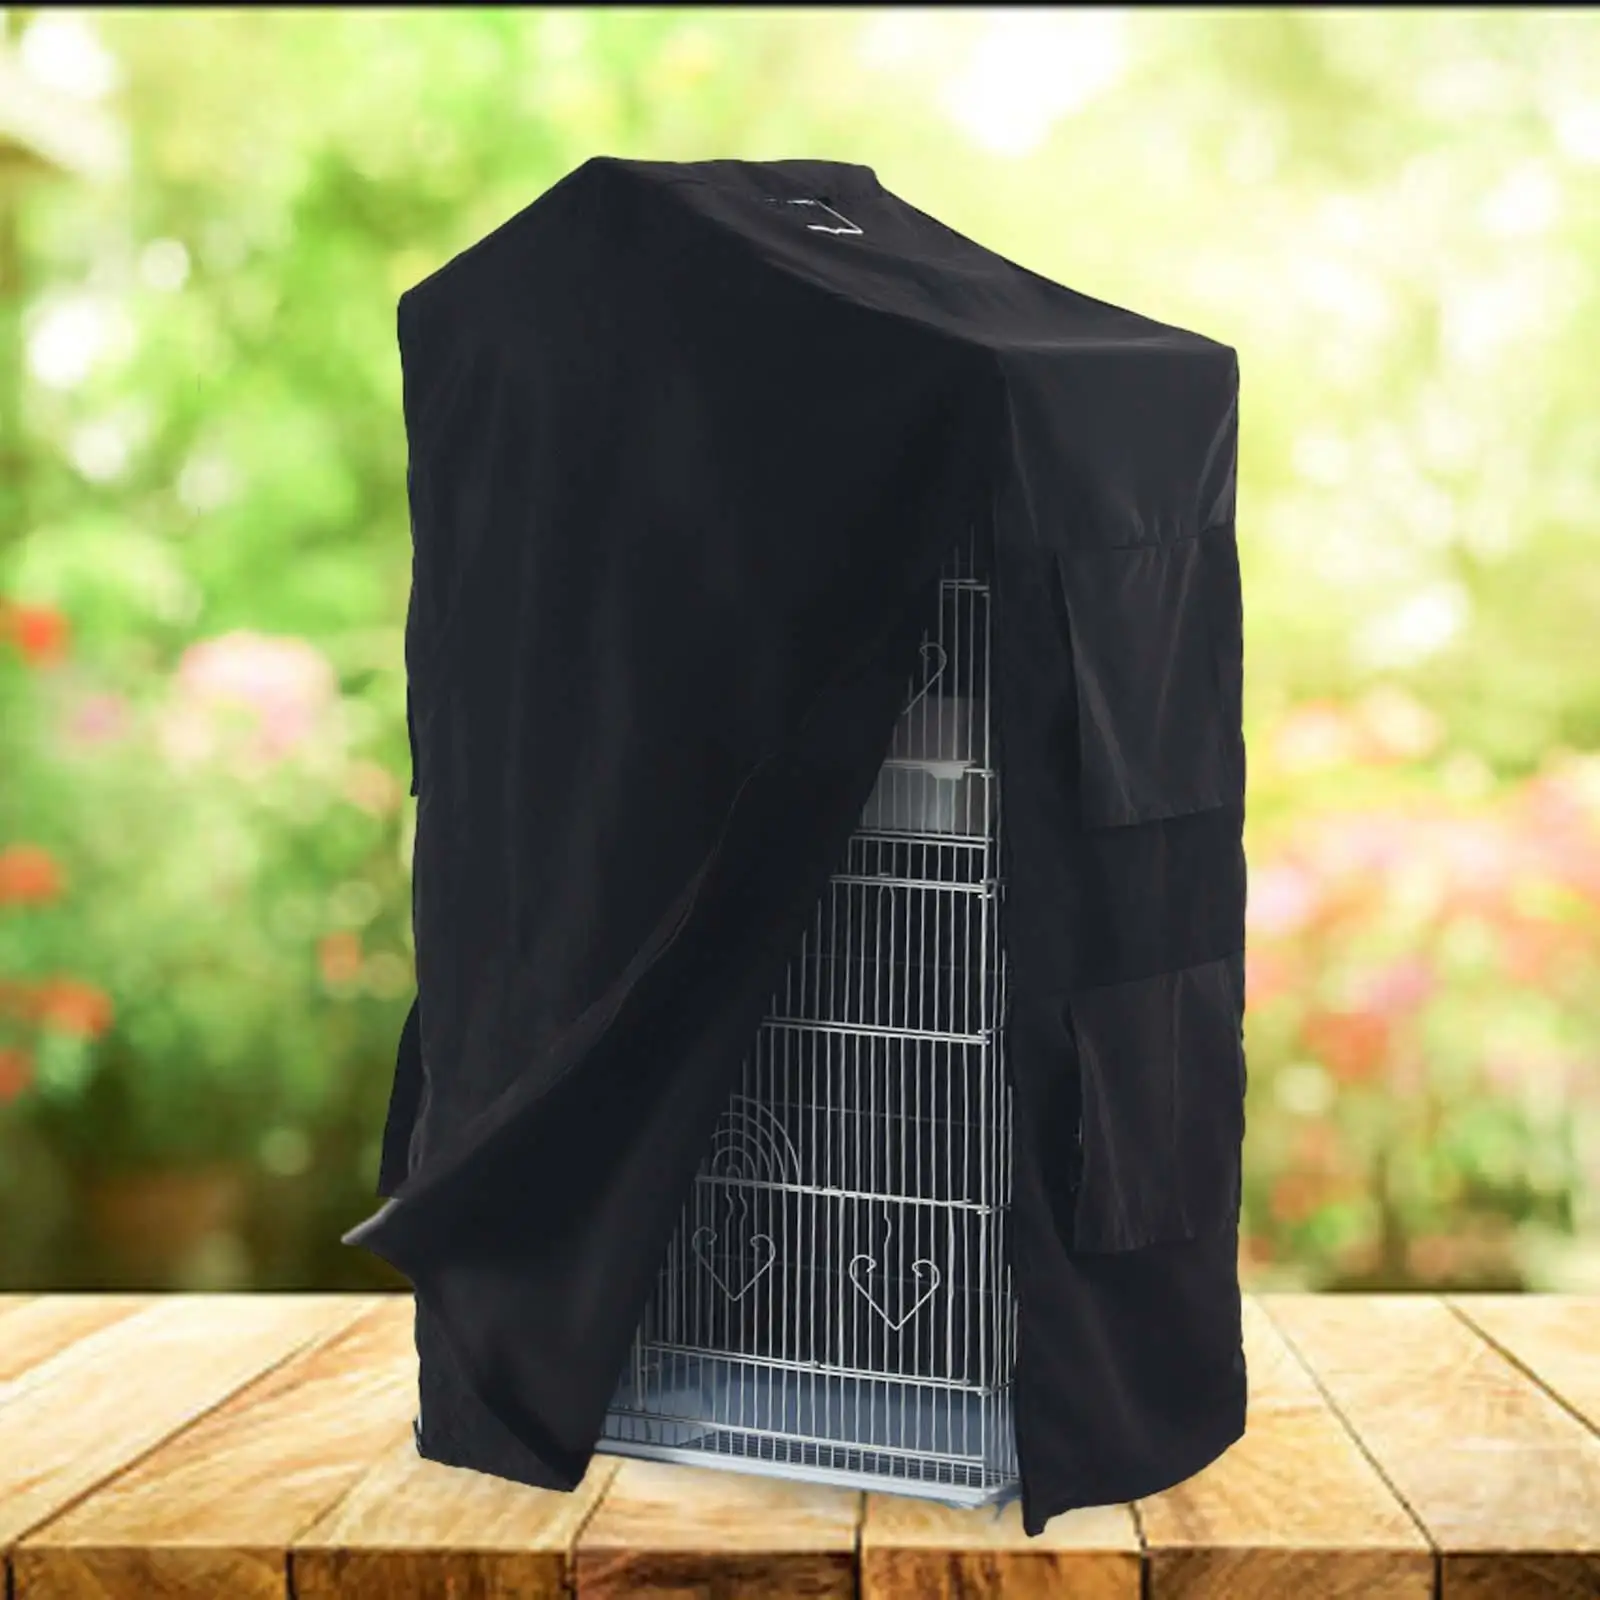 Bird Cage Cover Rainproof Shading Cloth Good Night Windproof Birdcage Cover for Budgies Parakeets Lovebirds Parrot Square Cages